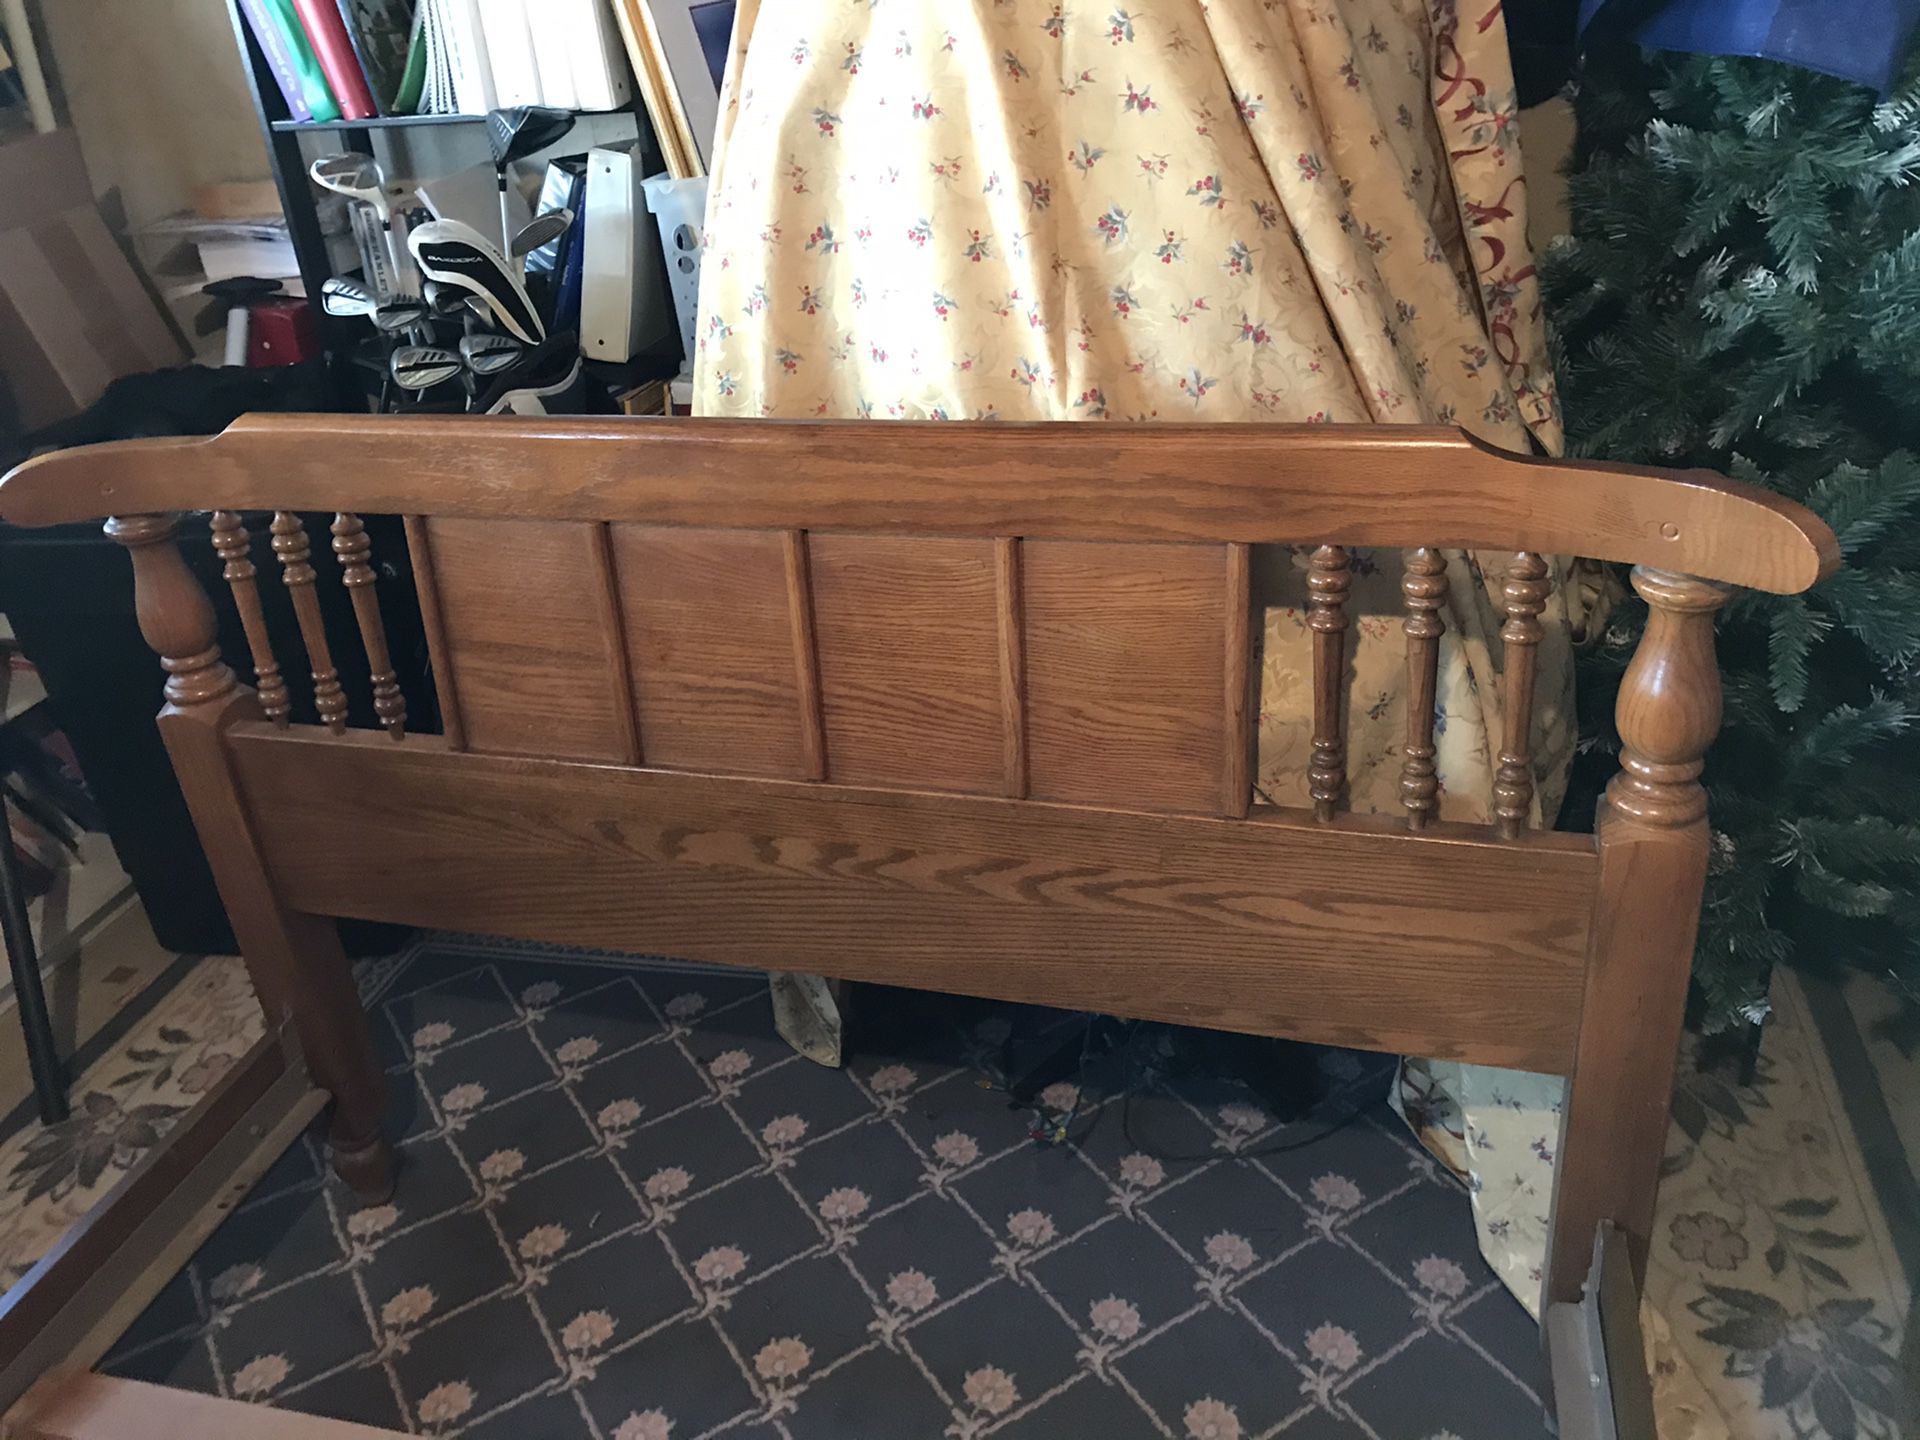 Solid Oak bed frame for full sized bed 56 x 84. $25